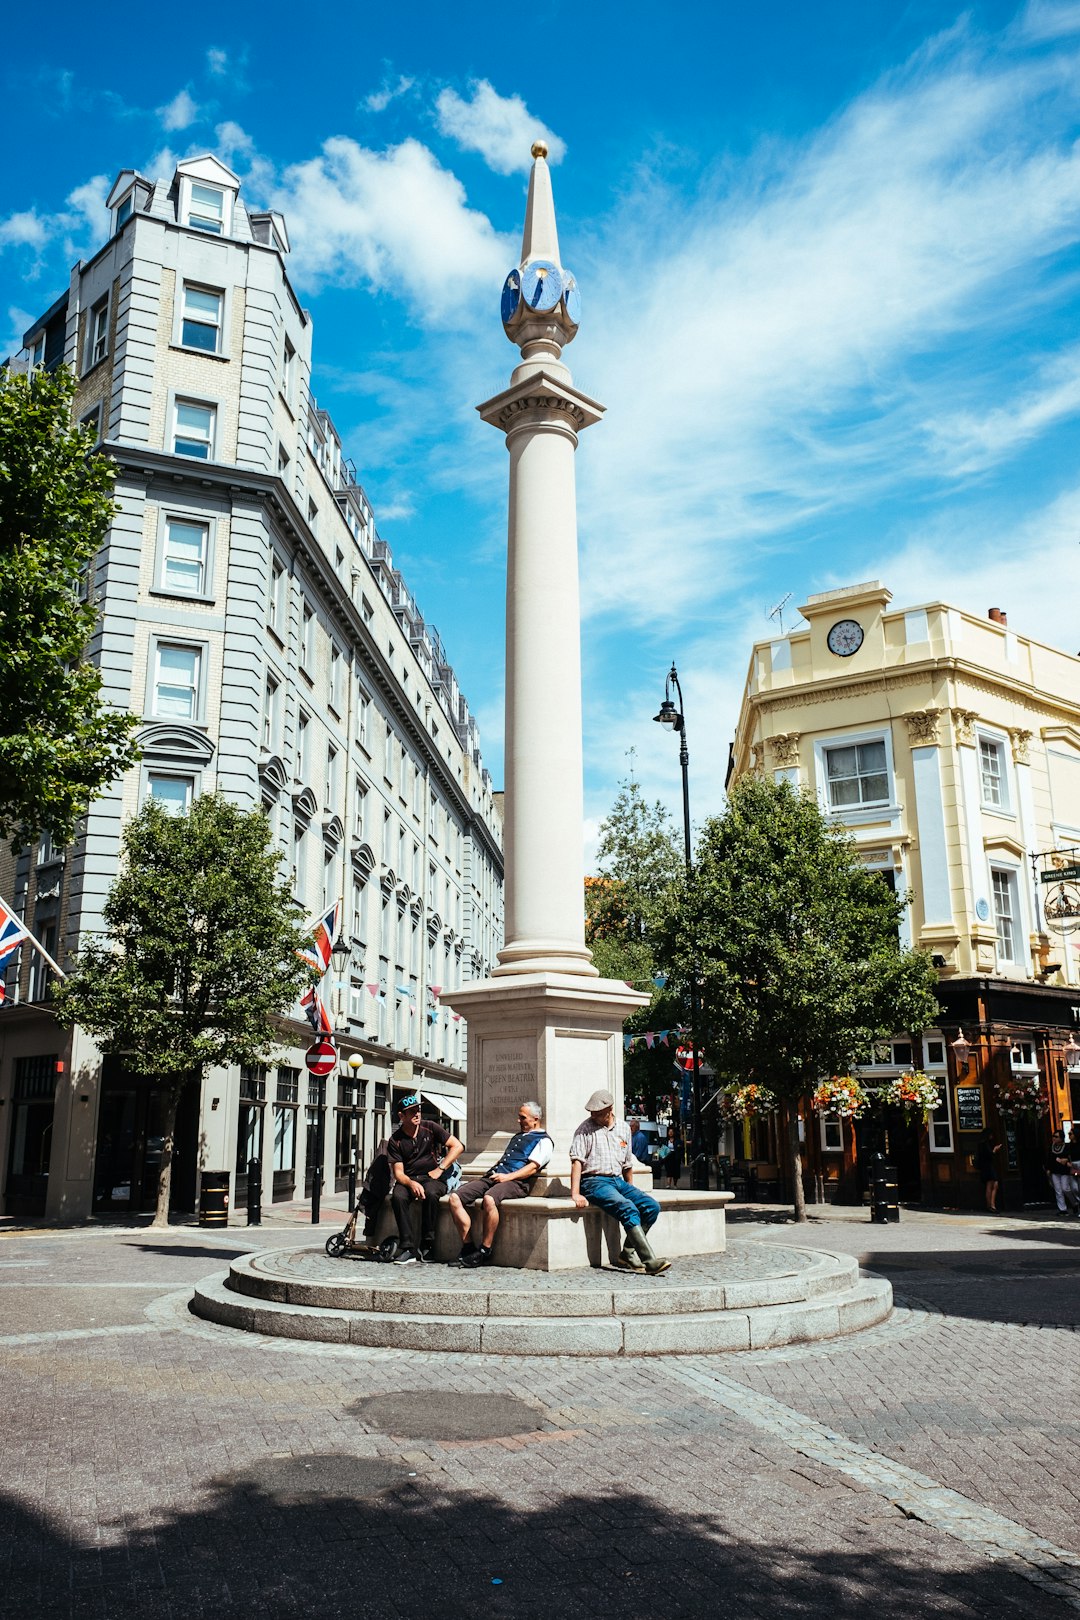 Travel Tips and Stories of Seven Dials in United Kingdom